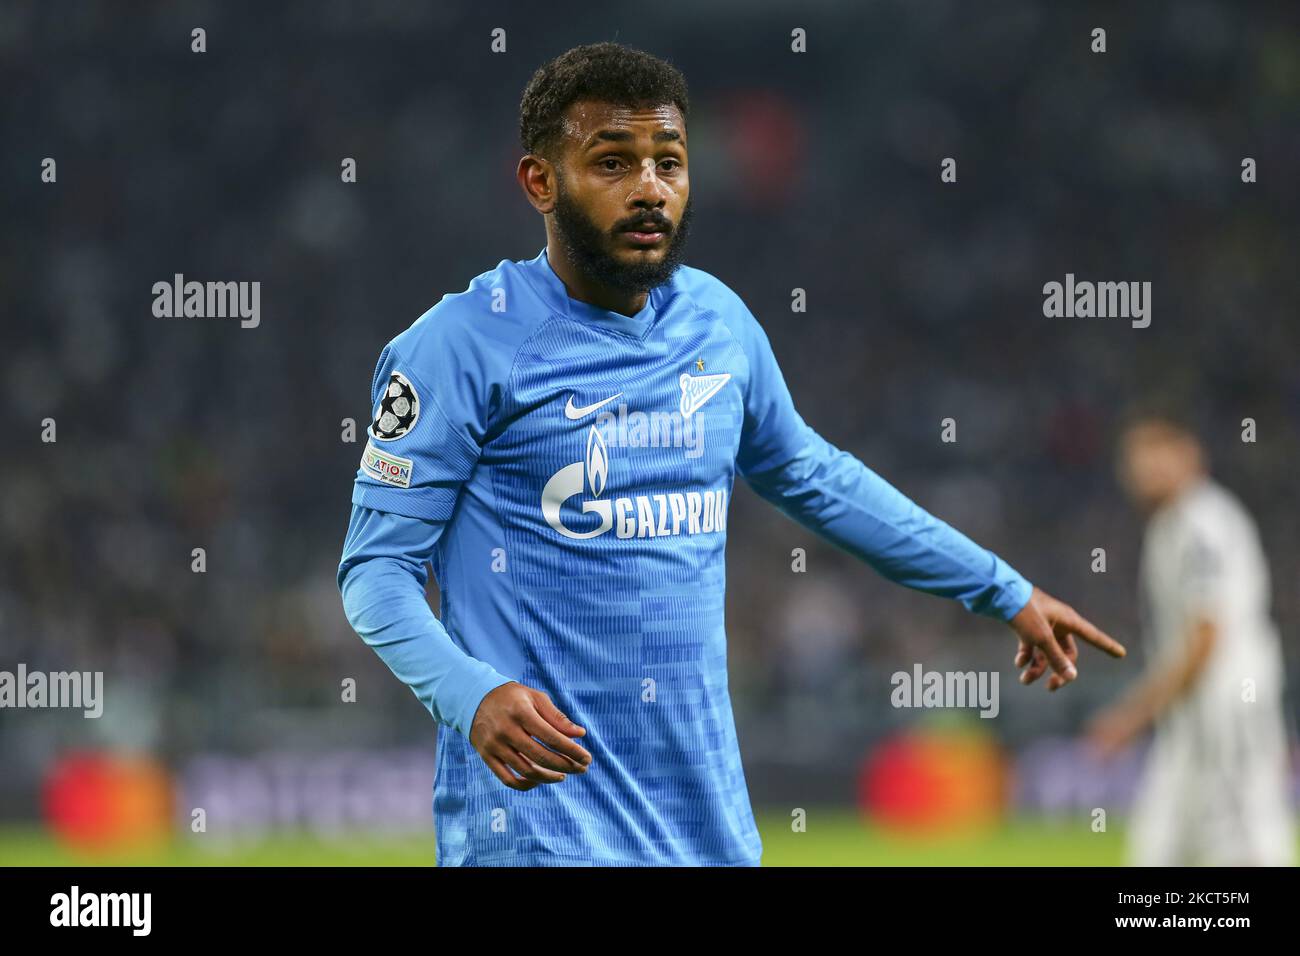 Wendel of FK Zenit Sankt-Peterburg during the UEFA Champions League match (Group H) between Juventus FC and FK Zenit Sankt-Peterburg at Allianz Stadium on November 02, 2021 in Turin, Italy. Juventus won 4-2 over Zenit. (Photo by Massimiliano Ferraro/NurPhoto) Stock Photo